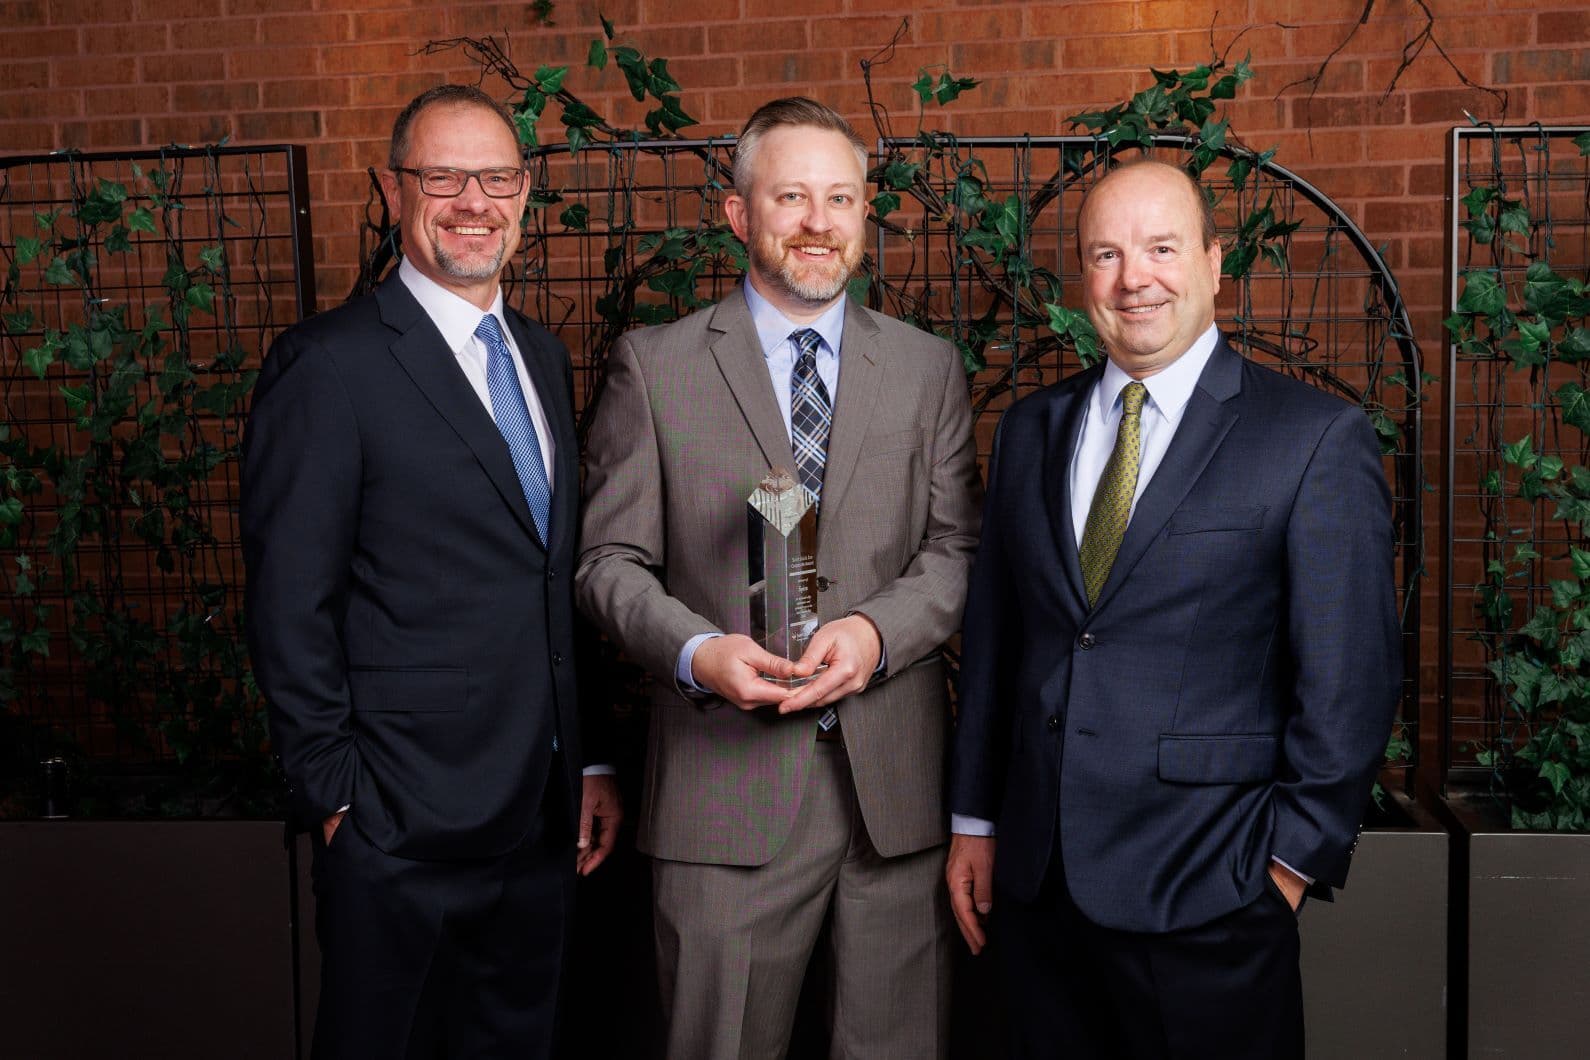 The Saint Louis Zoo presented the 2023 Saint Louis Zoo Corporate Award to Spire at the 32nd annual Marlin Perkins Society Celebration on Nov. 7, 2023.